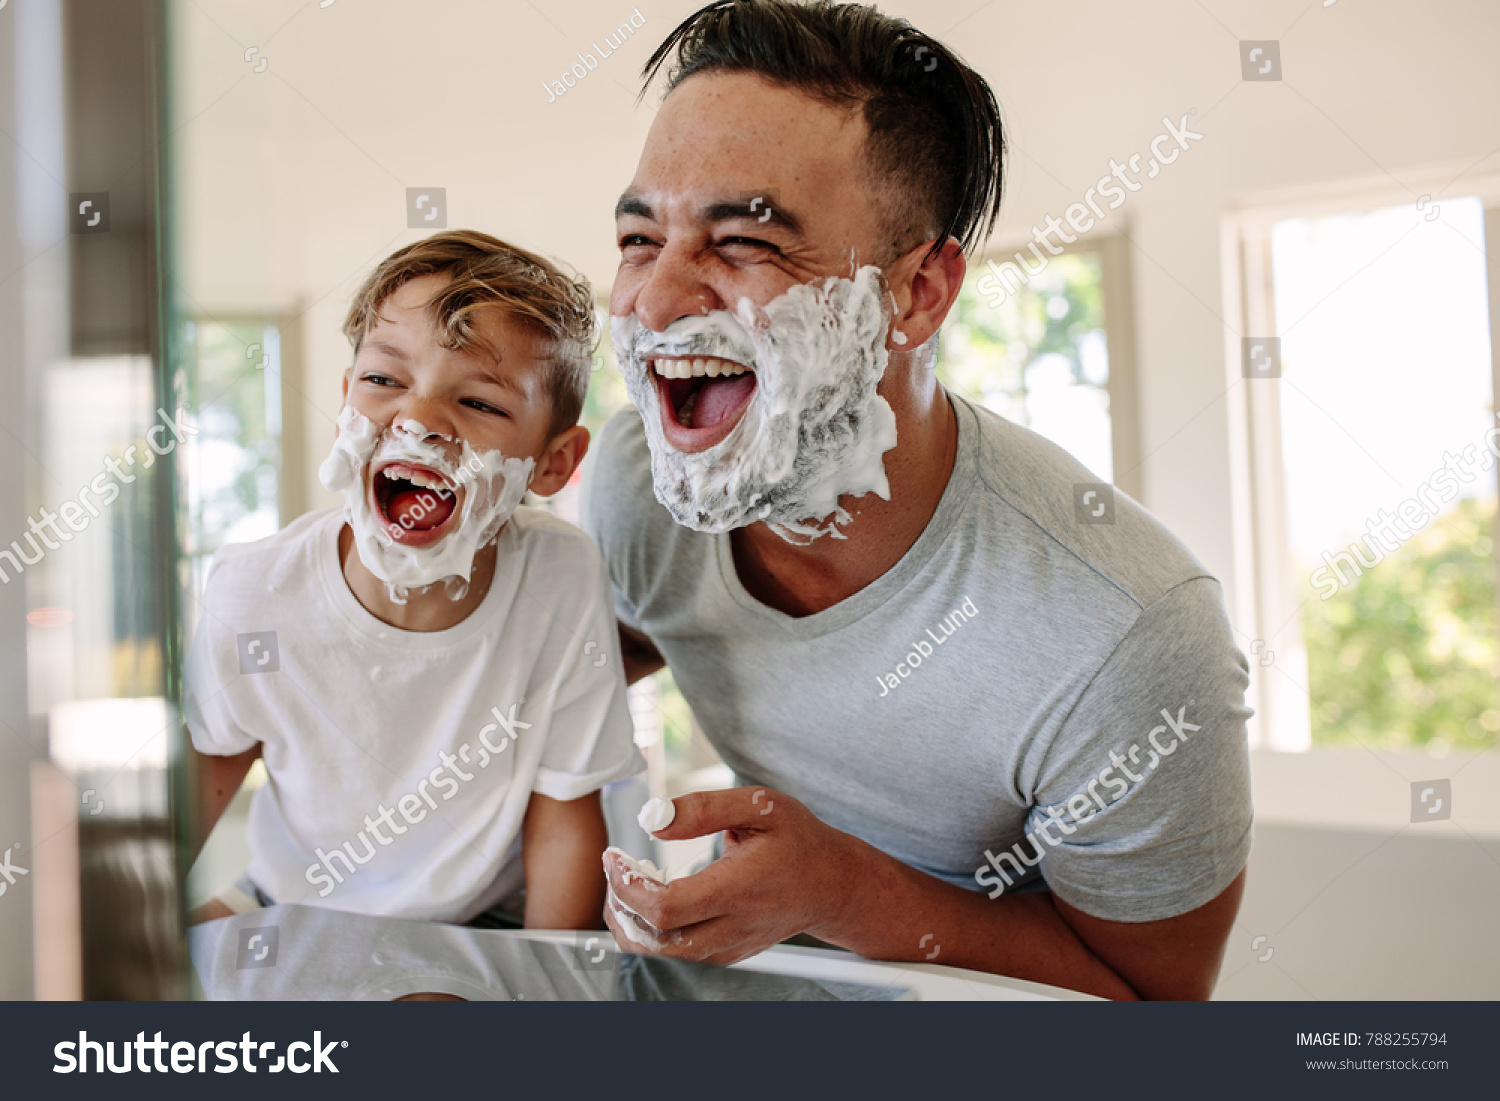 Man and little boy with shaving foam on their faces looking into the bathroom mirror and laughing. Father and son having fun while shaving in bathroom. #788255794